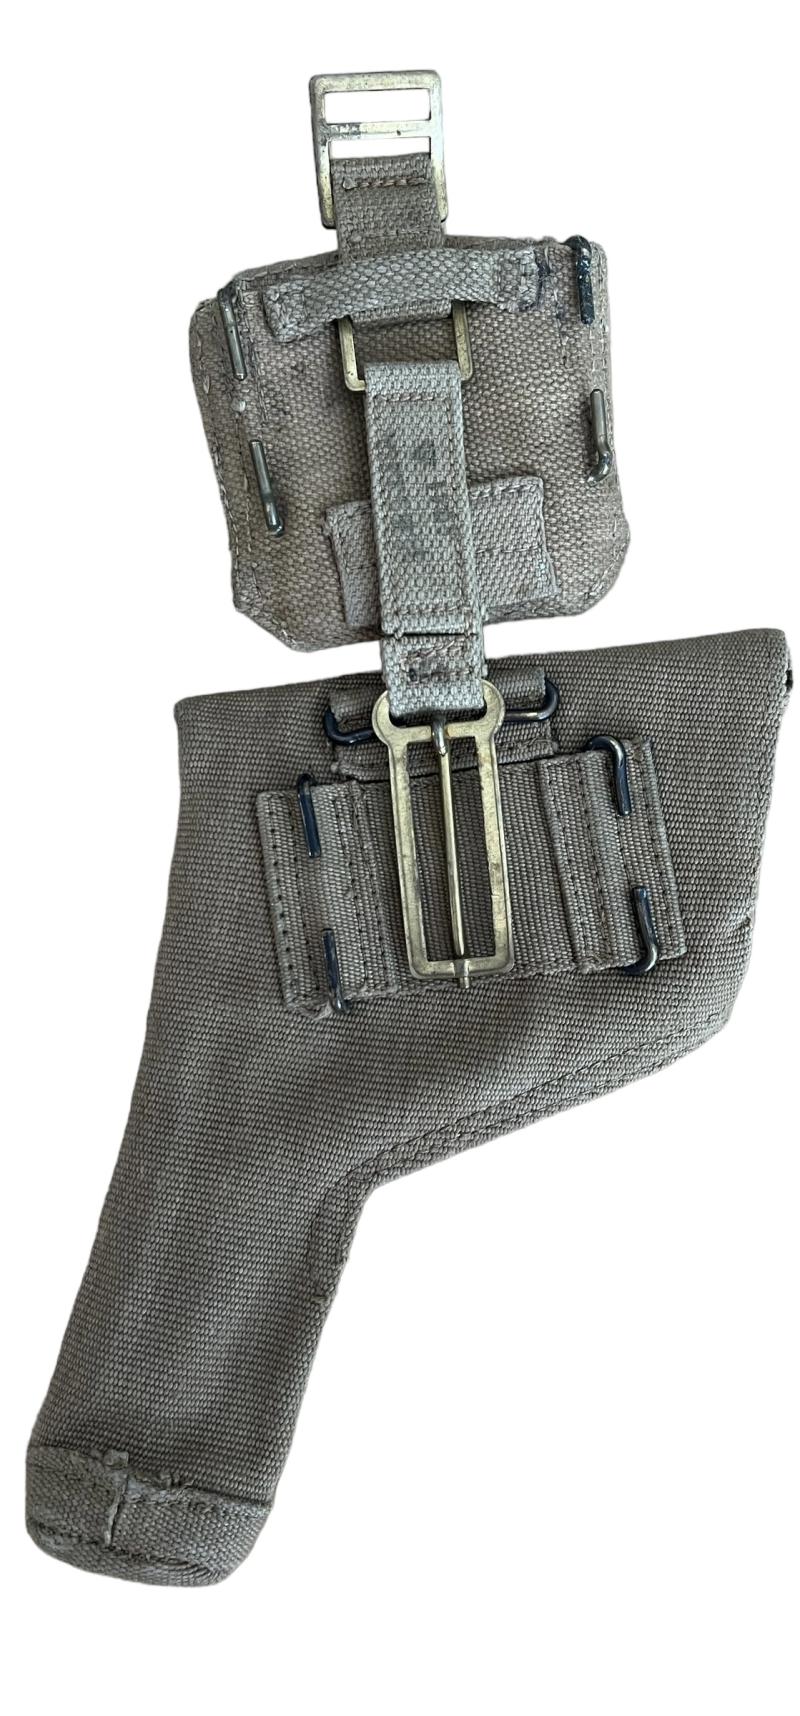 British 1937 Pattern Pistol Holster and Ammunition Pouch - Nice Used Condition